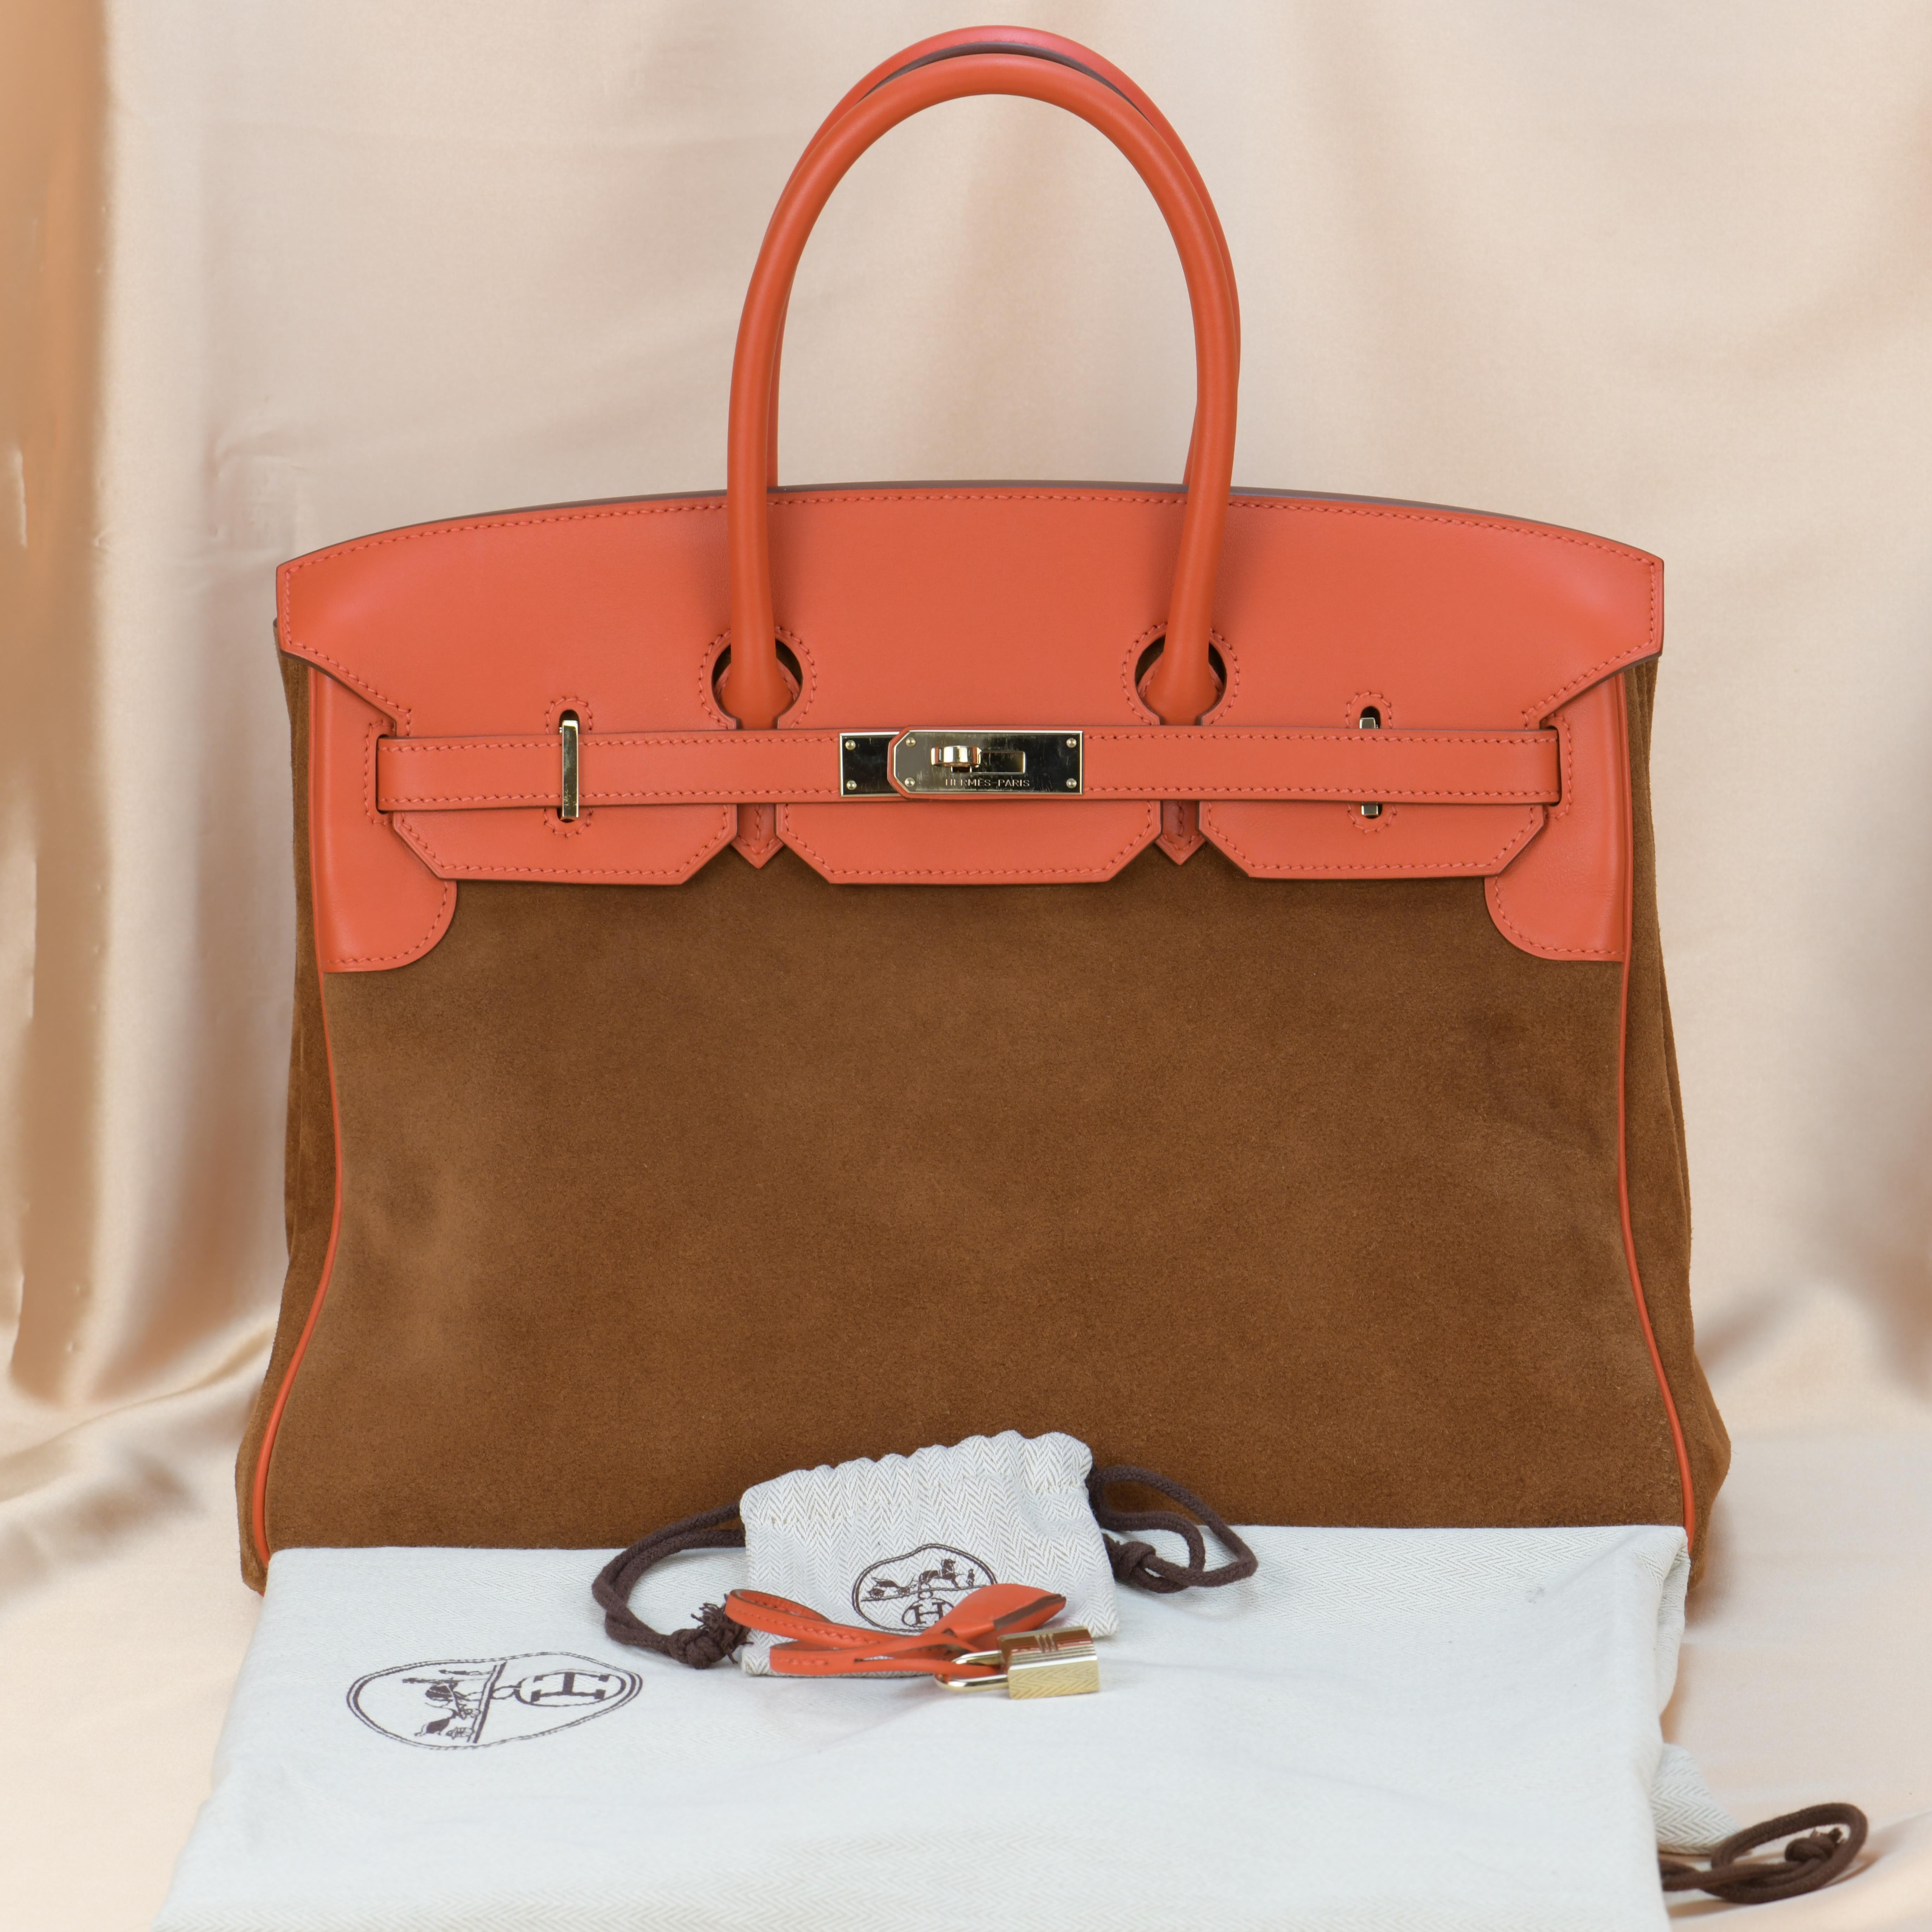 Brand	Hermès
Model	Birkin 35cm
Measurements    	Approx. 35cm L x 26cm H x 18cm D
Leather    Chamois and Evercolor 
Date Stamp	Q in a Square	
Color	Grizzly Brown and Capucine Red
Date	Circa 2013
Metal	Permabrass
Condition	Excellent Condition
Comes